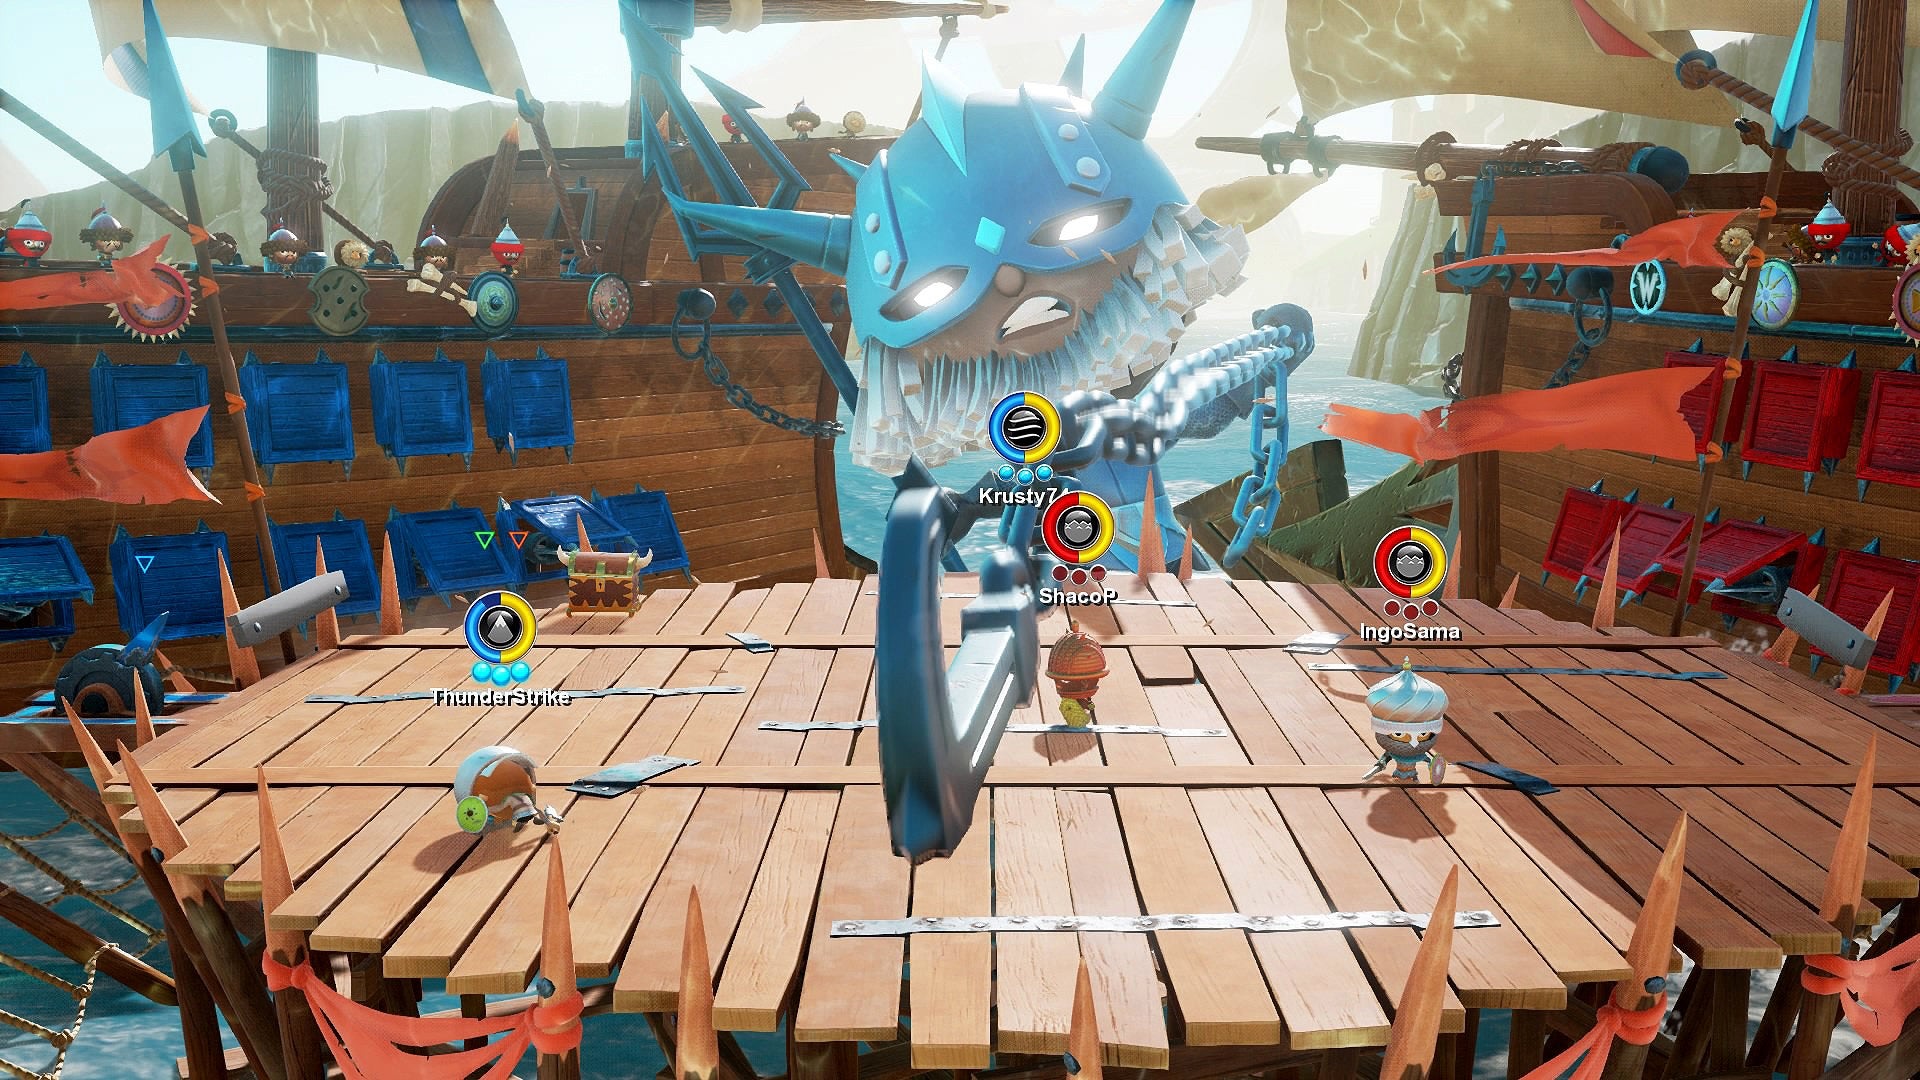 World of Warriors gameplay scene with characters on ship deck.